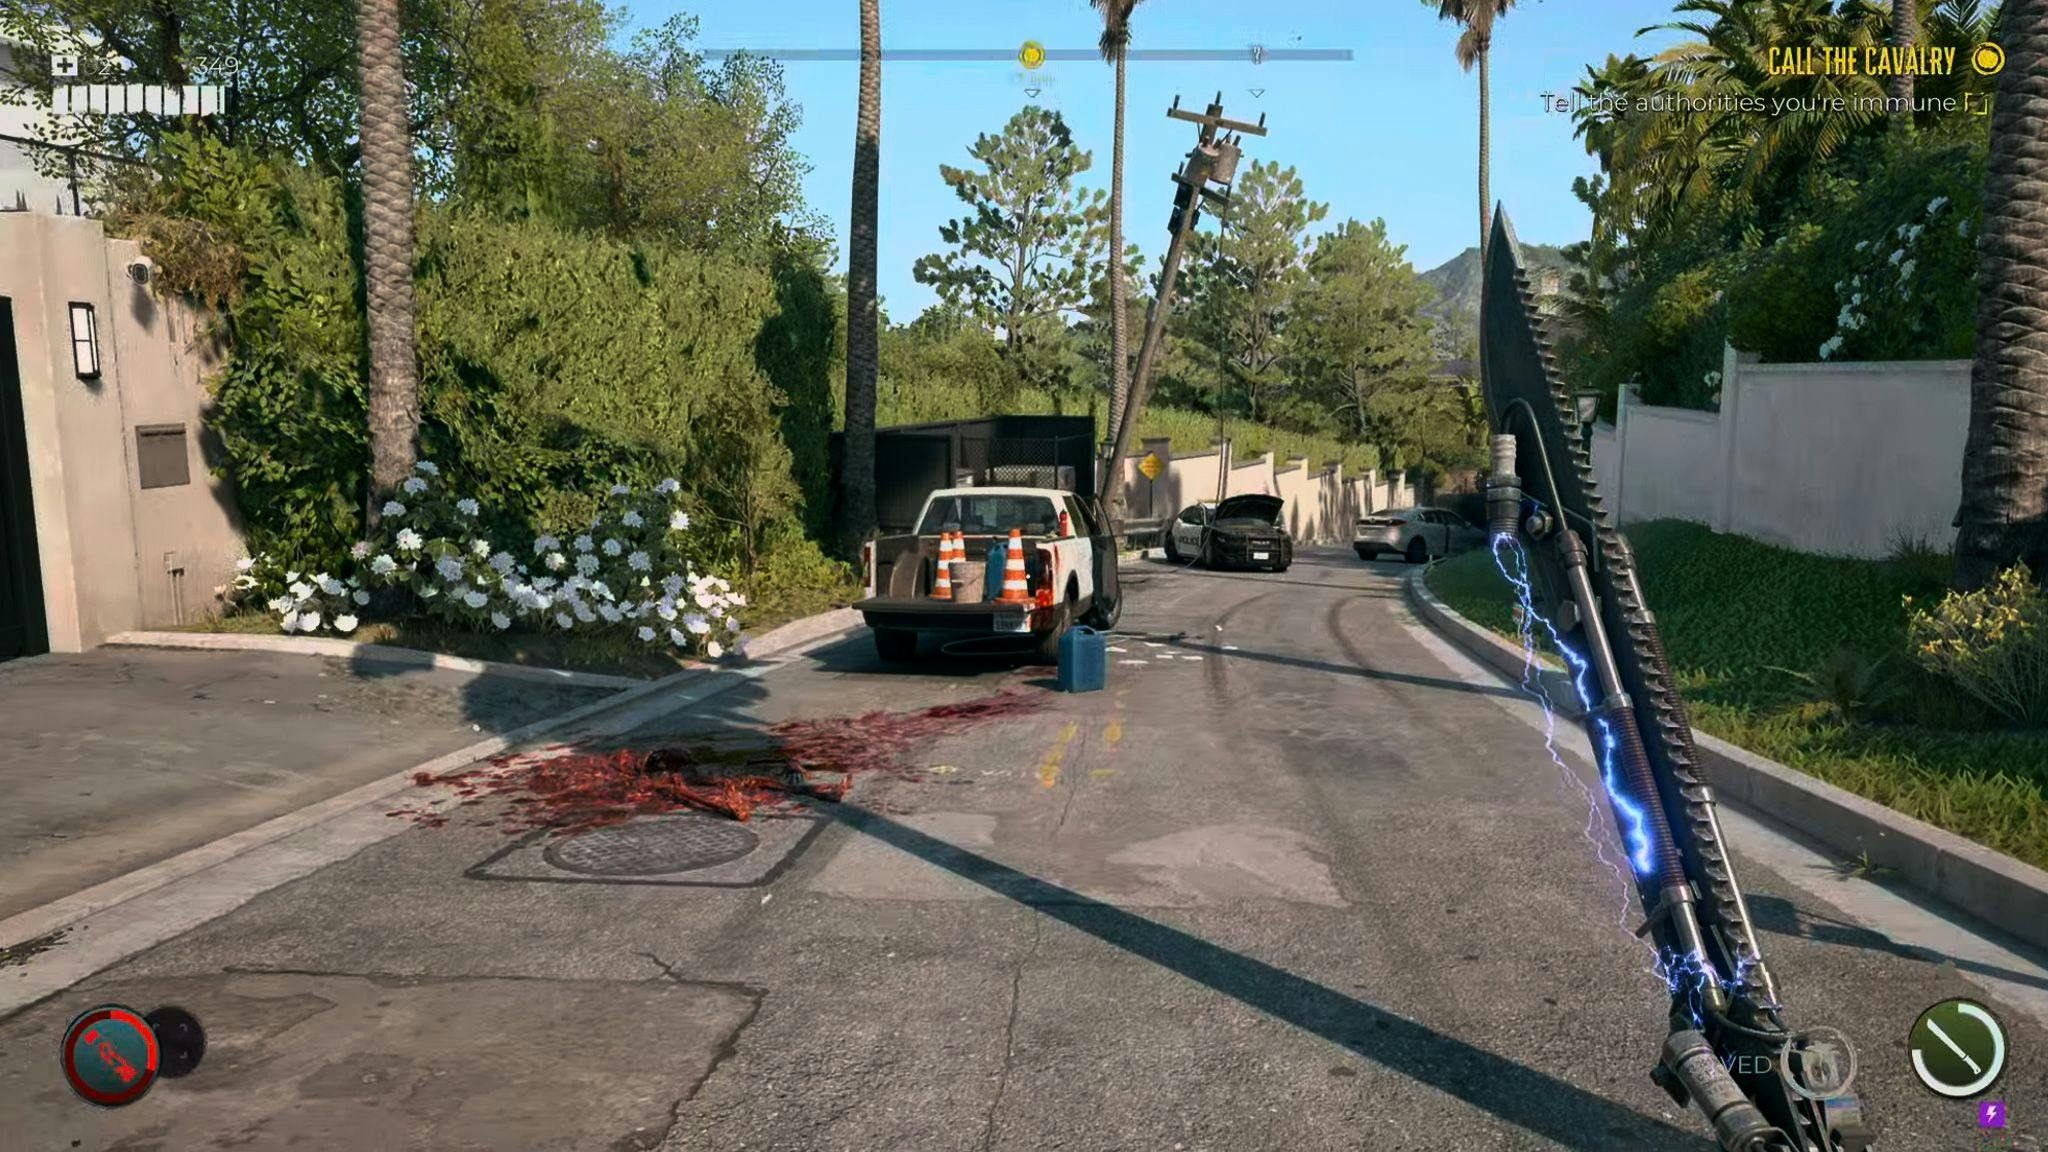 A screenshot from Dead Island 2 depicting a road with a bloodstain. An electrified sword in the foreground.